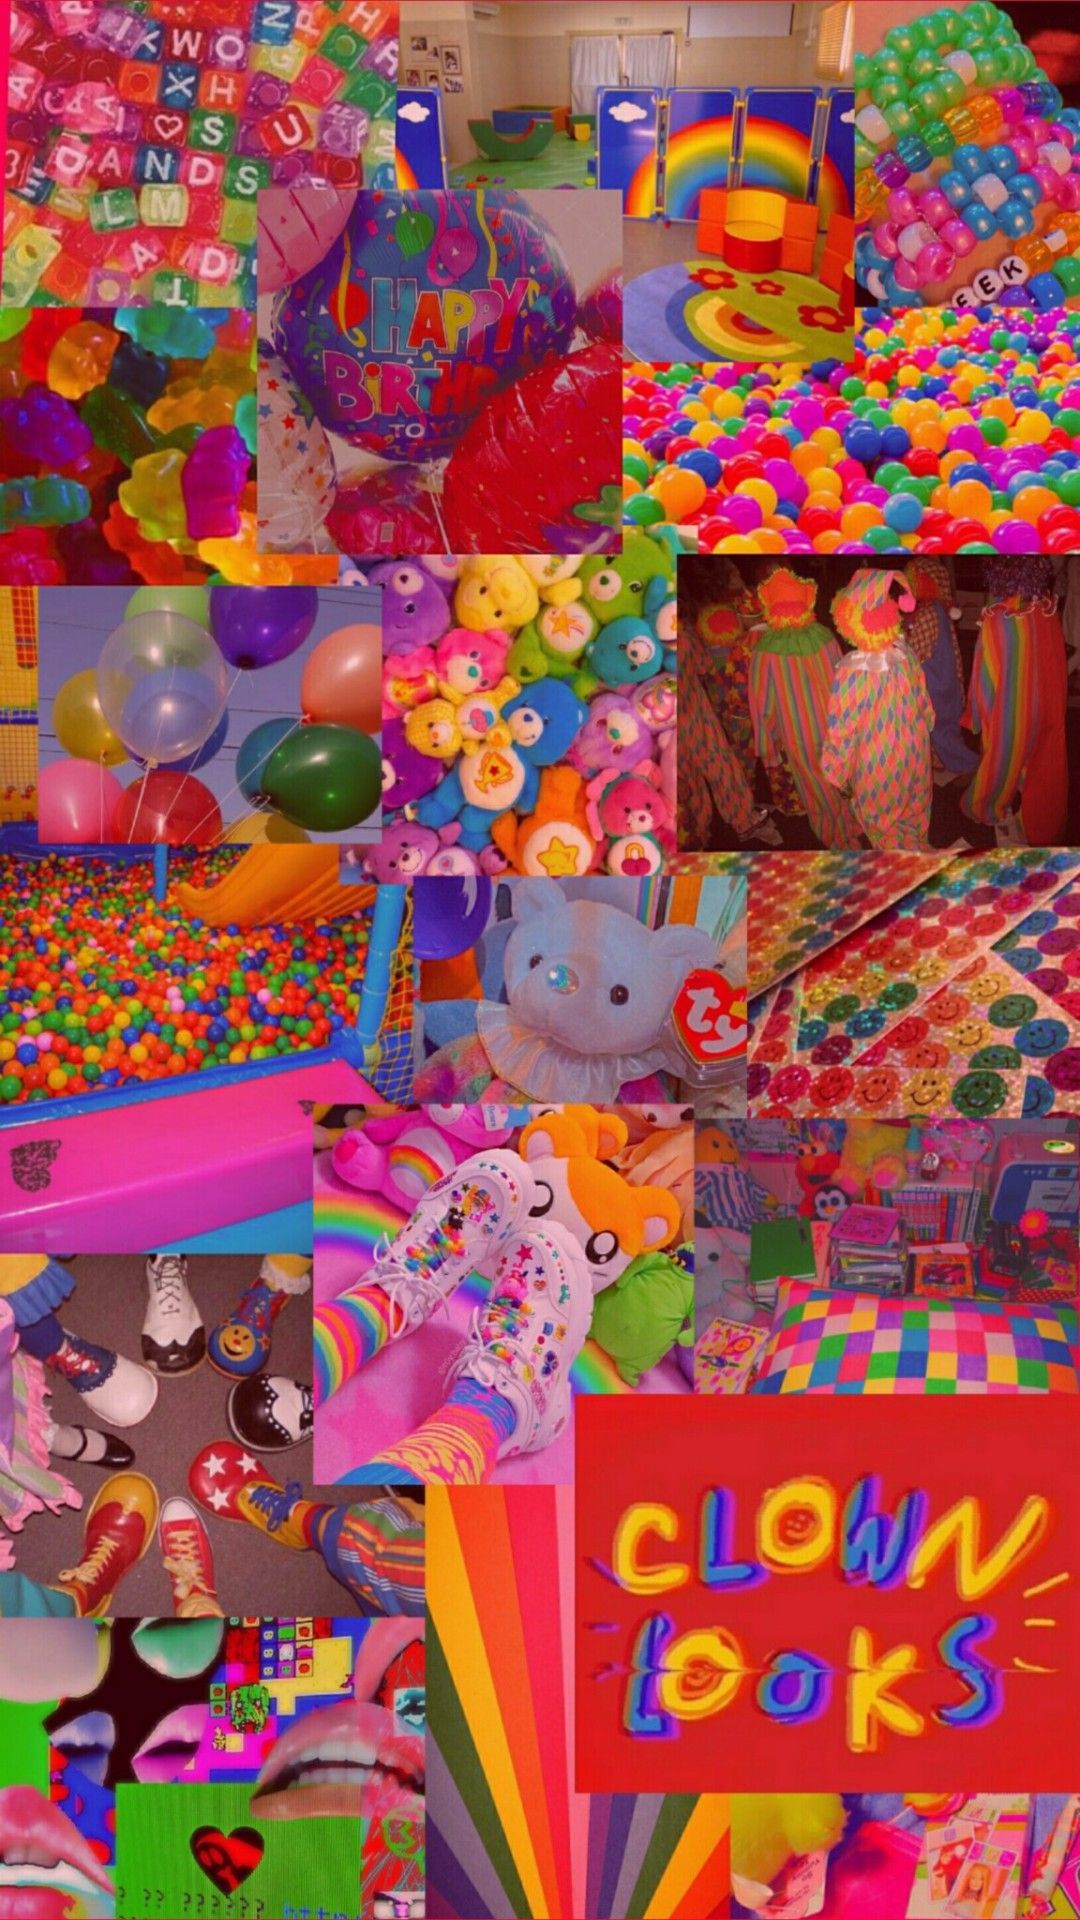 Aesthetic background with images of a room filled with balloons, a rainbow, and a sign that says 